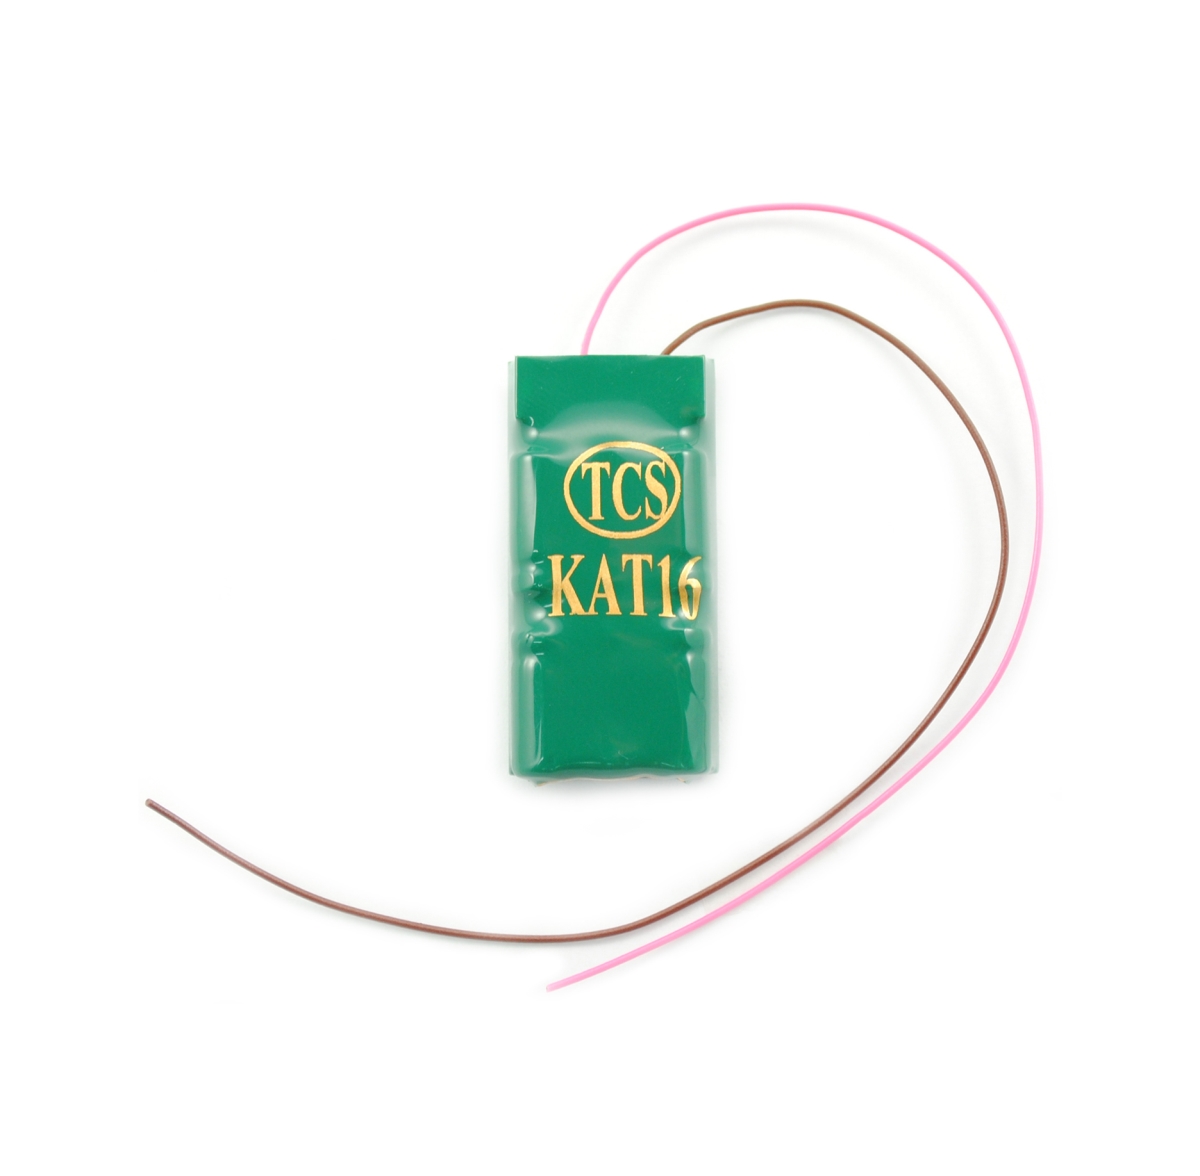 Tcs1463 Kat16 T1 6 - Function Decoder With Built - In Keep Alive Device